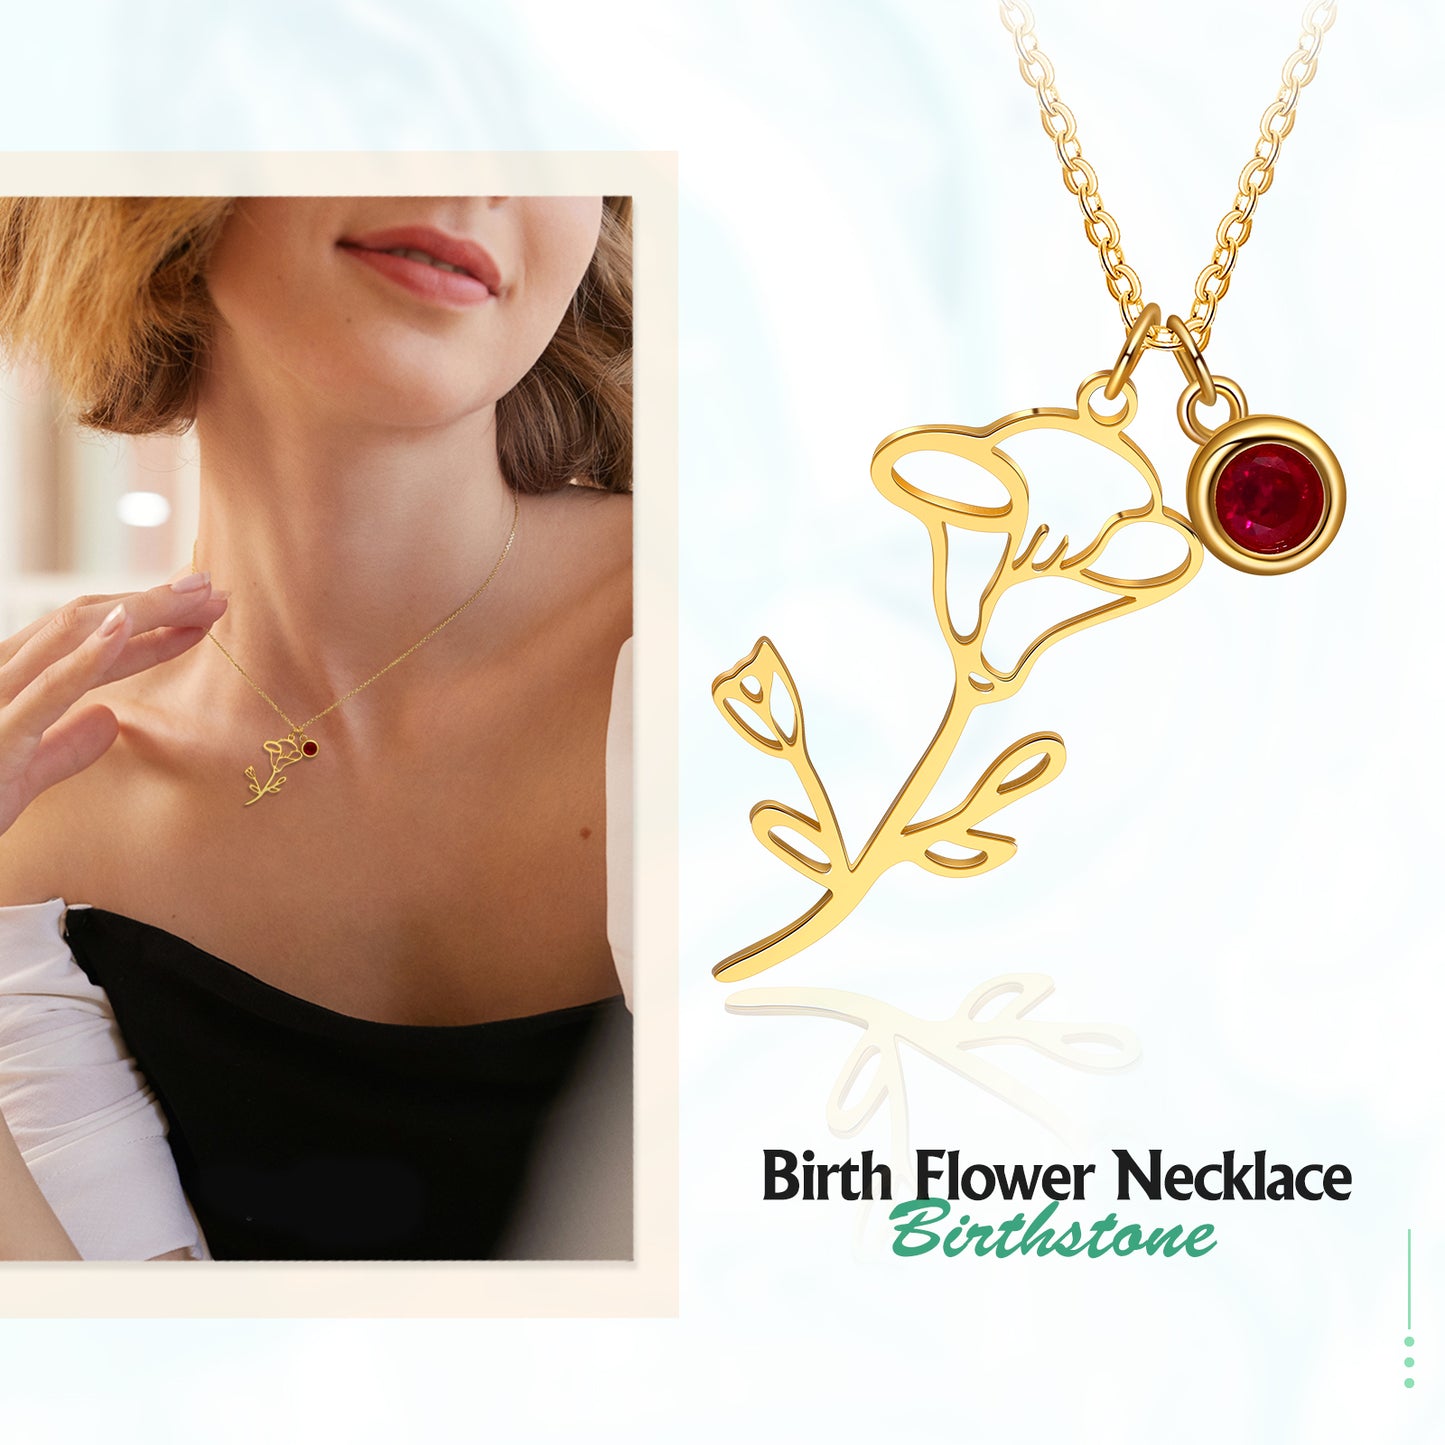 Birth Flower 925 sterling silver necklace with Birthstone